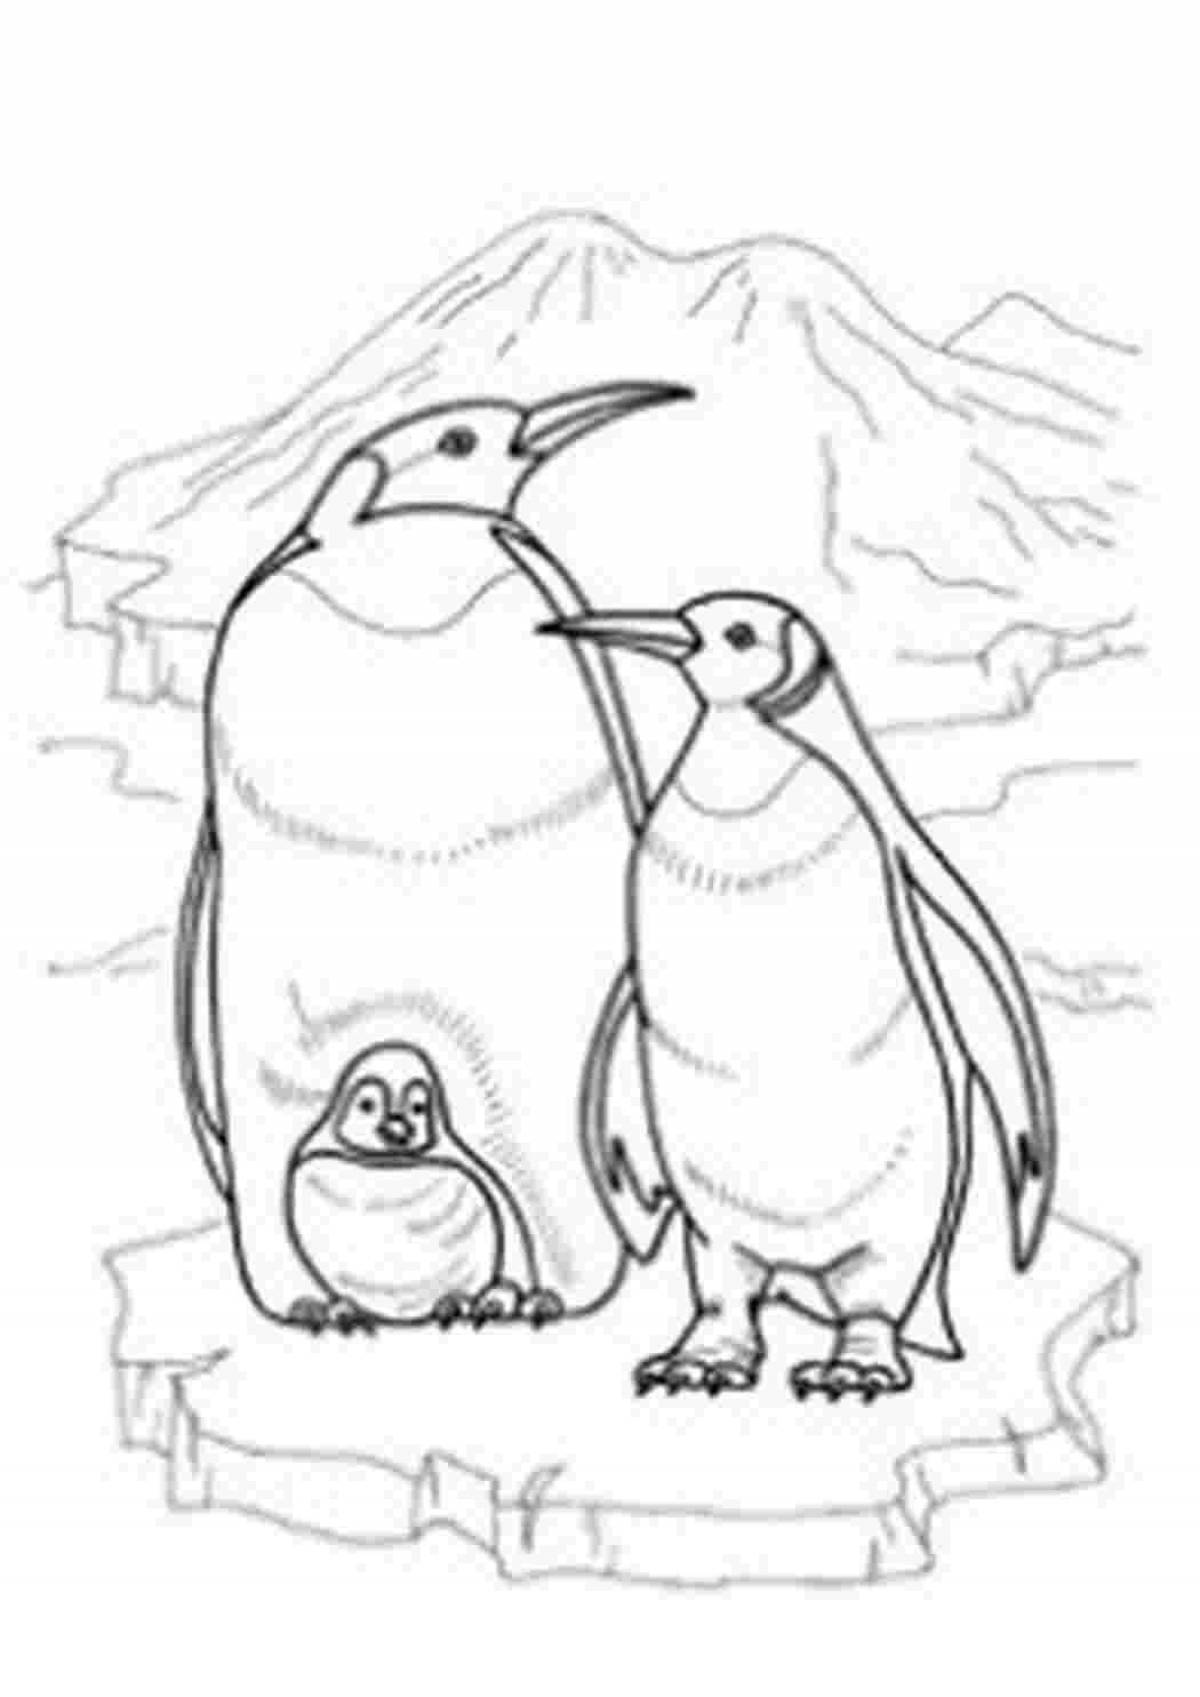 Coloring page shiny penguin on an ice floe for kids